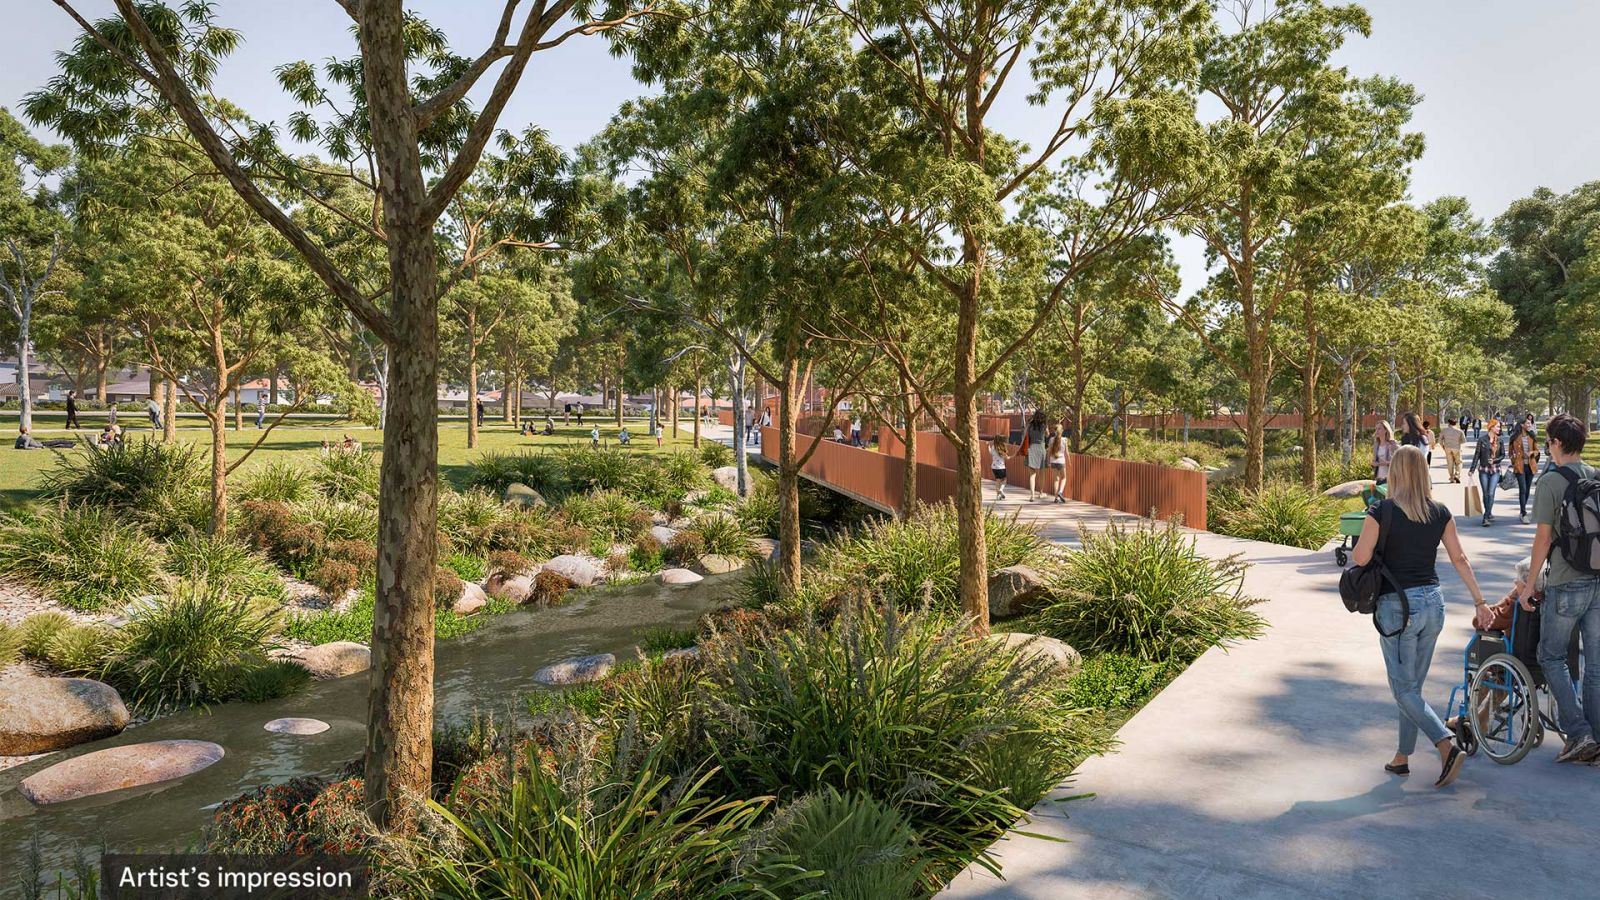 Artist’s impression of new Borlase Reserve parklands and trails running along Banyule Creek, Yallambie. View is looking west towards Greensborough Road.